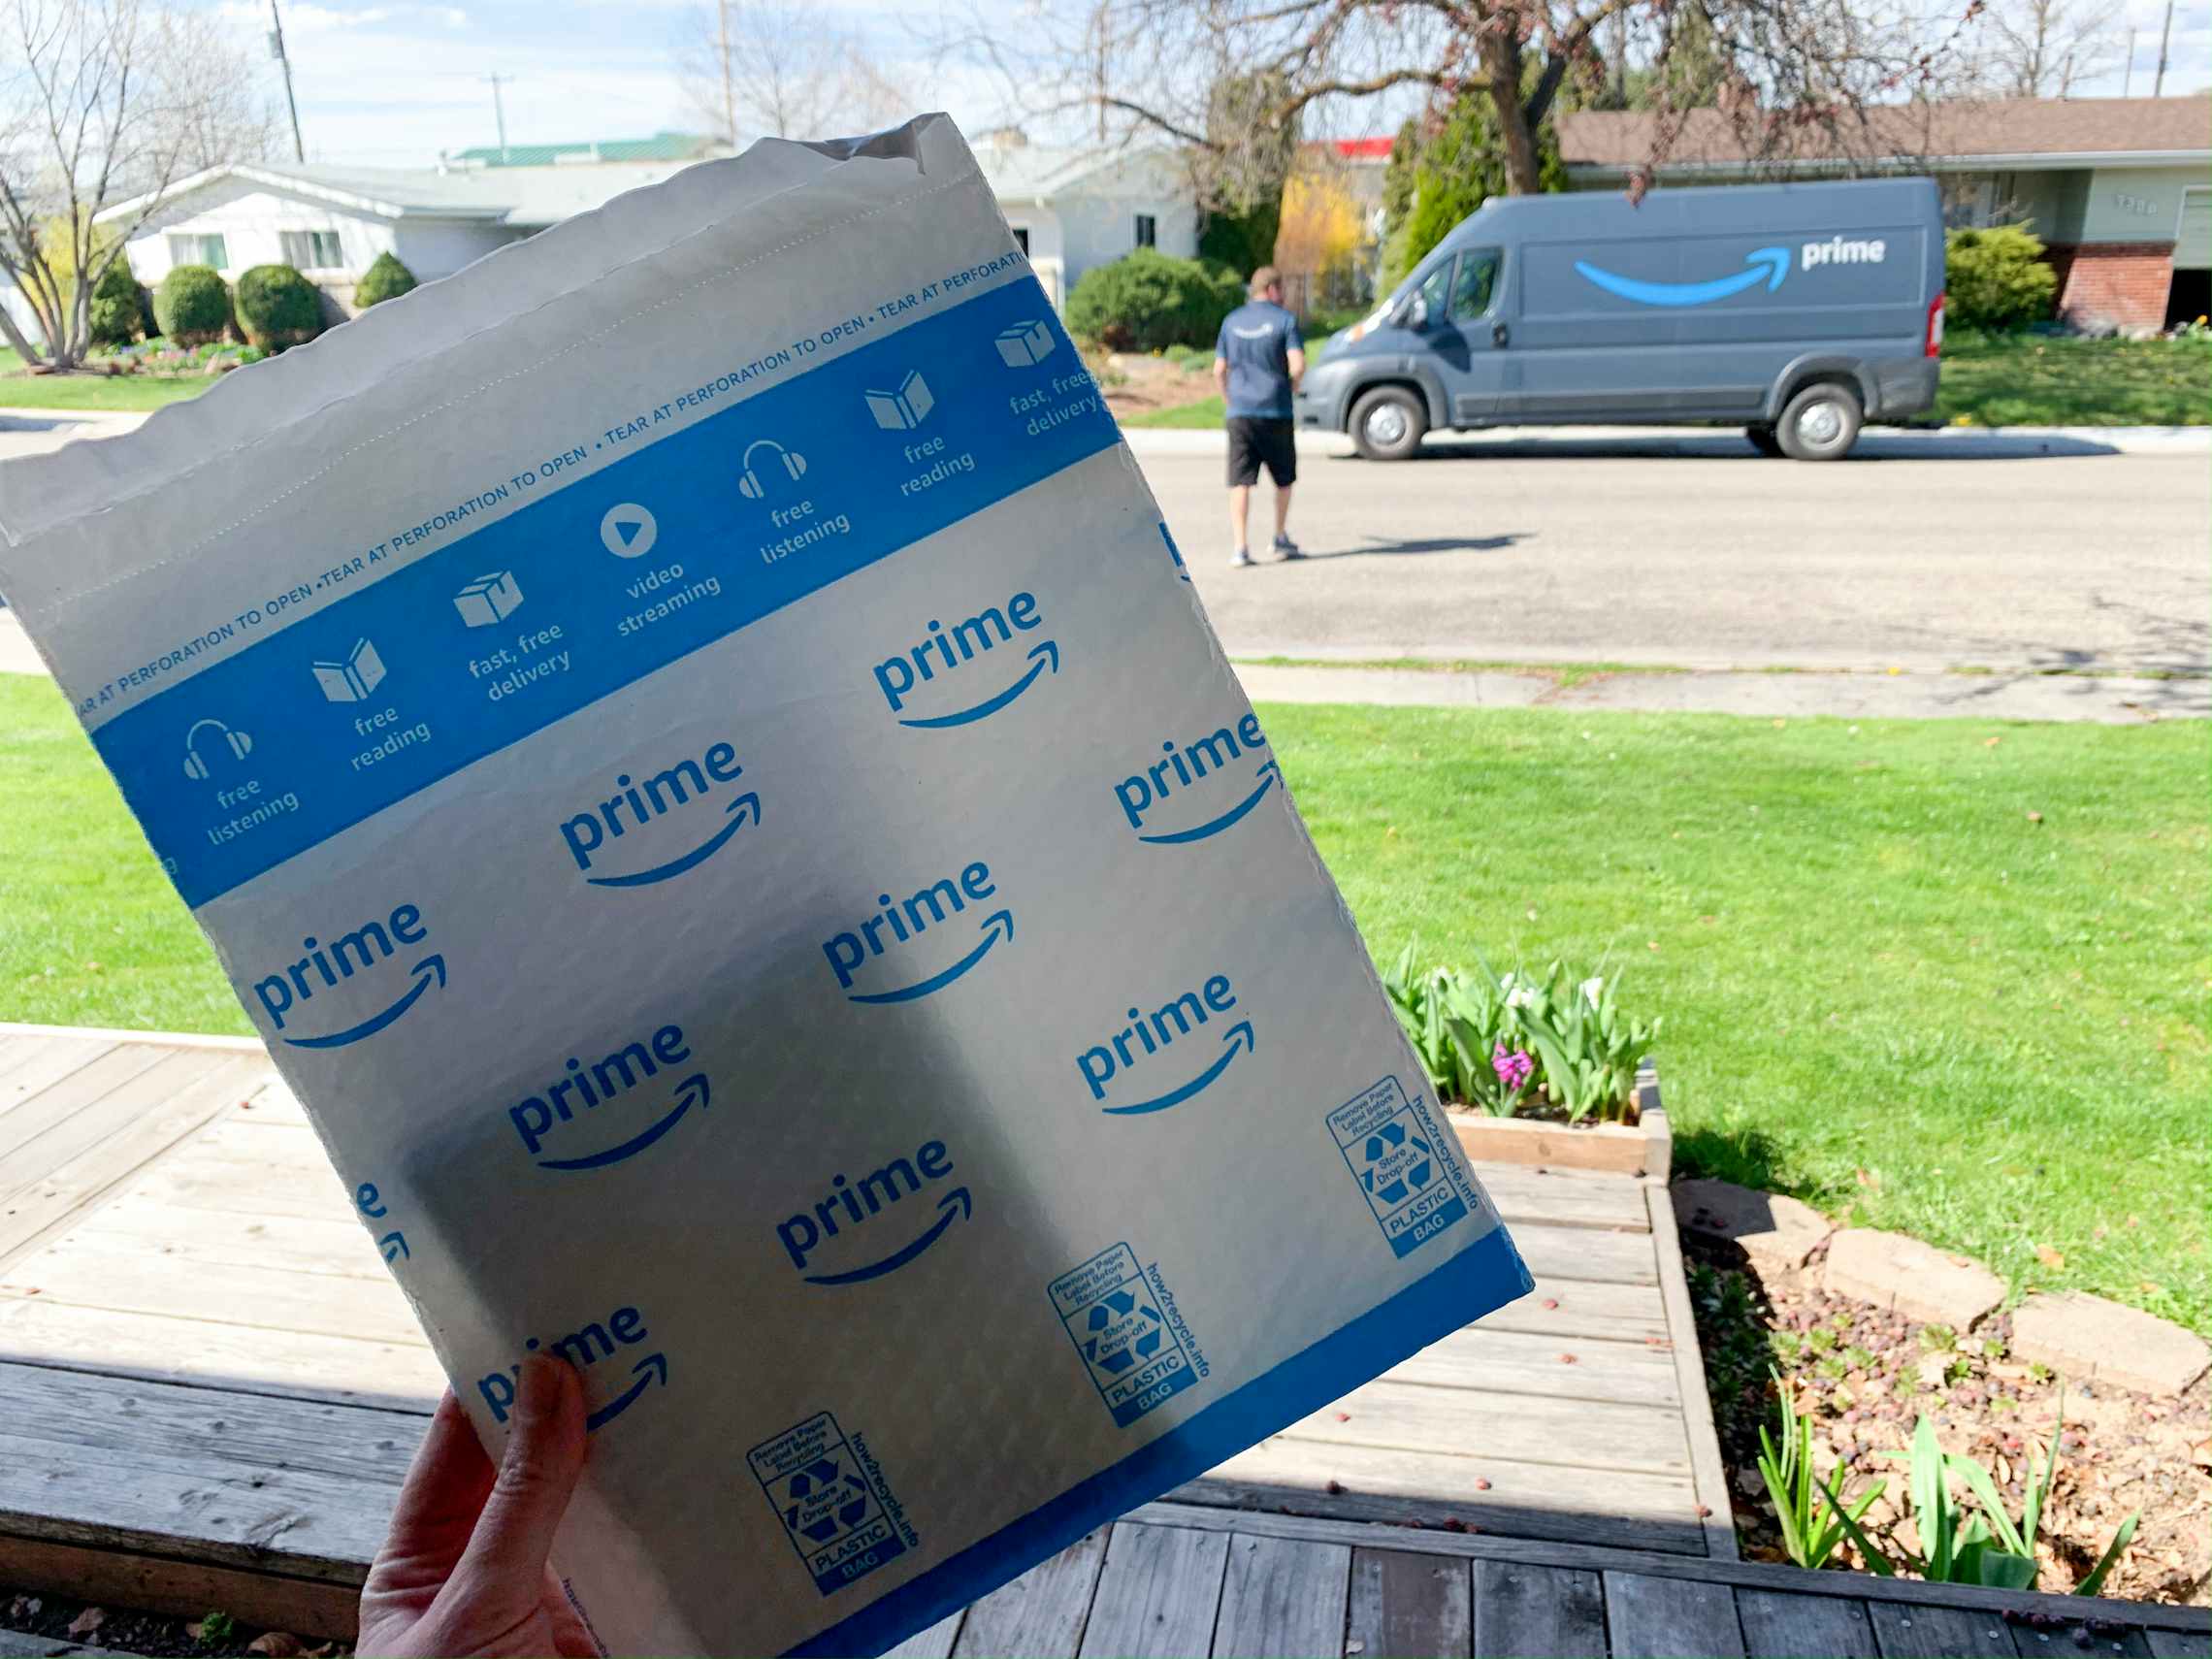 An amazon delivery package held up with a truck and delivery driver in the background.